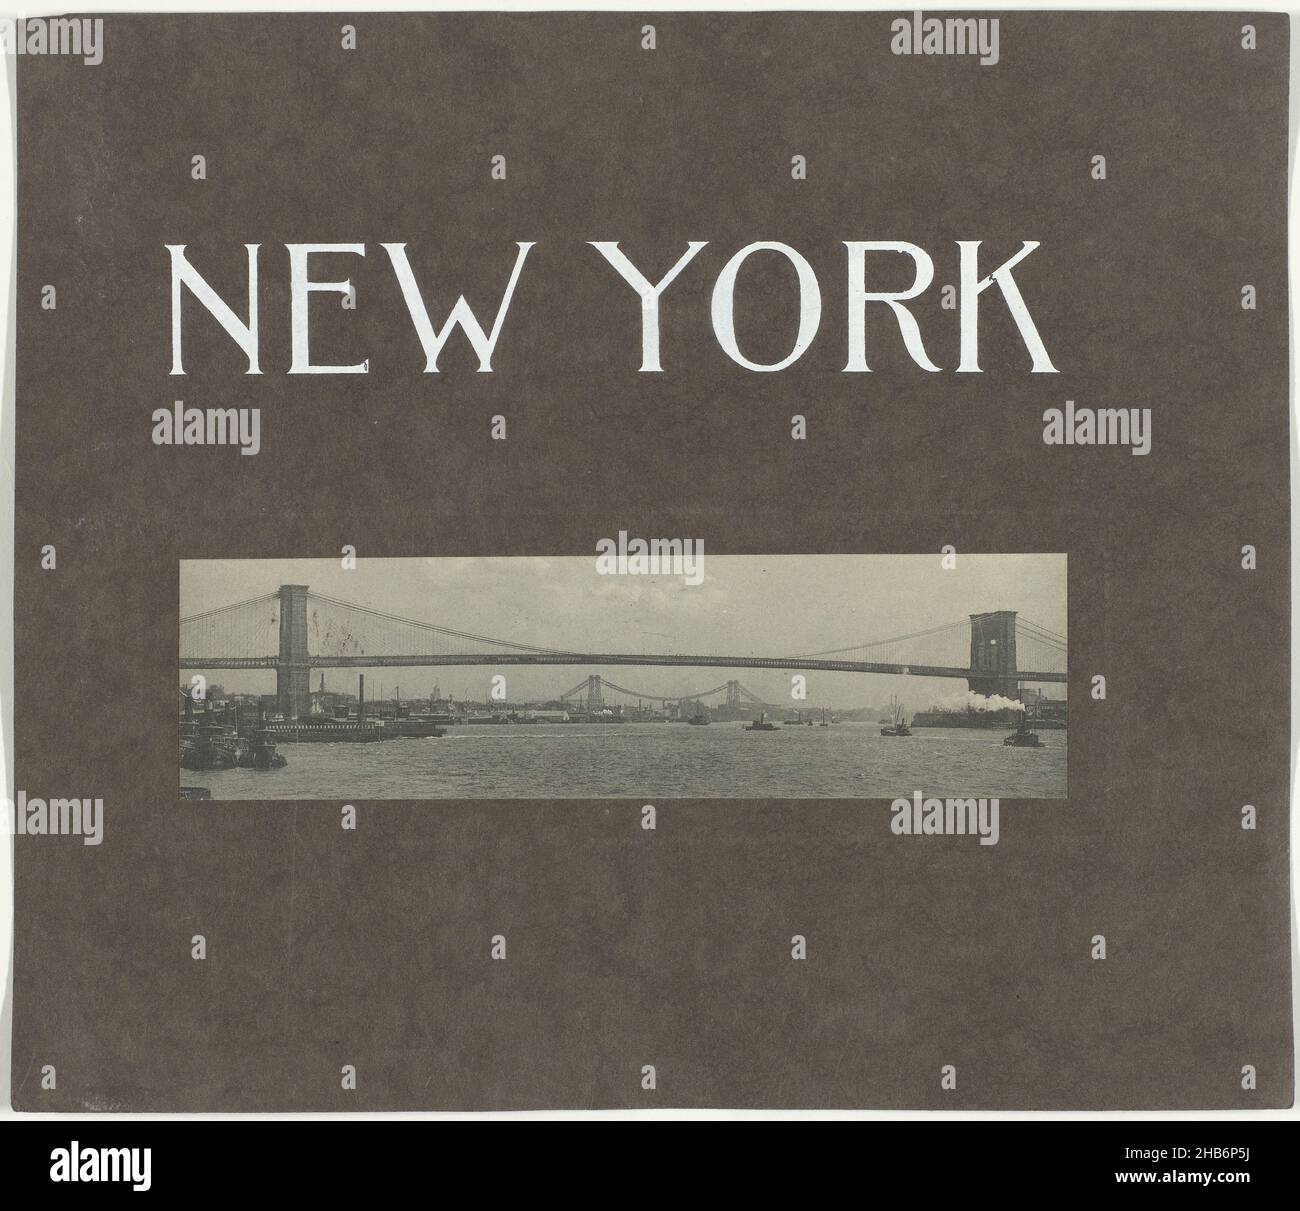 View of Brooklyn Bridge, New York, Print on the cover of the 'view book' New York., anonymous, maker: The Albertype Company (mentioned on object), New York (city), 1902, paper, collotype, height 51 mm × width 184 mm Stock Photo